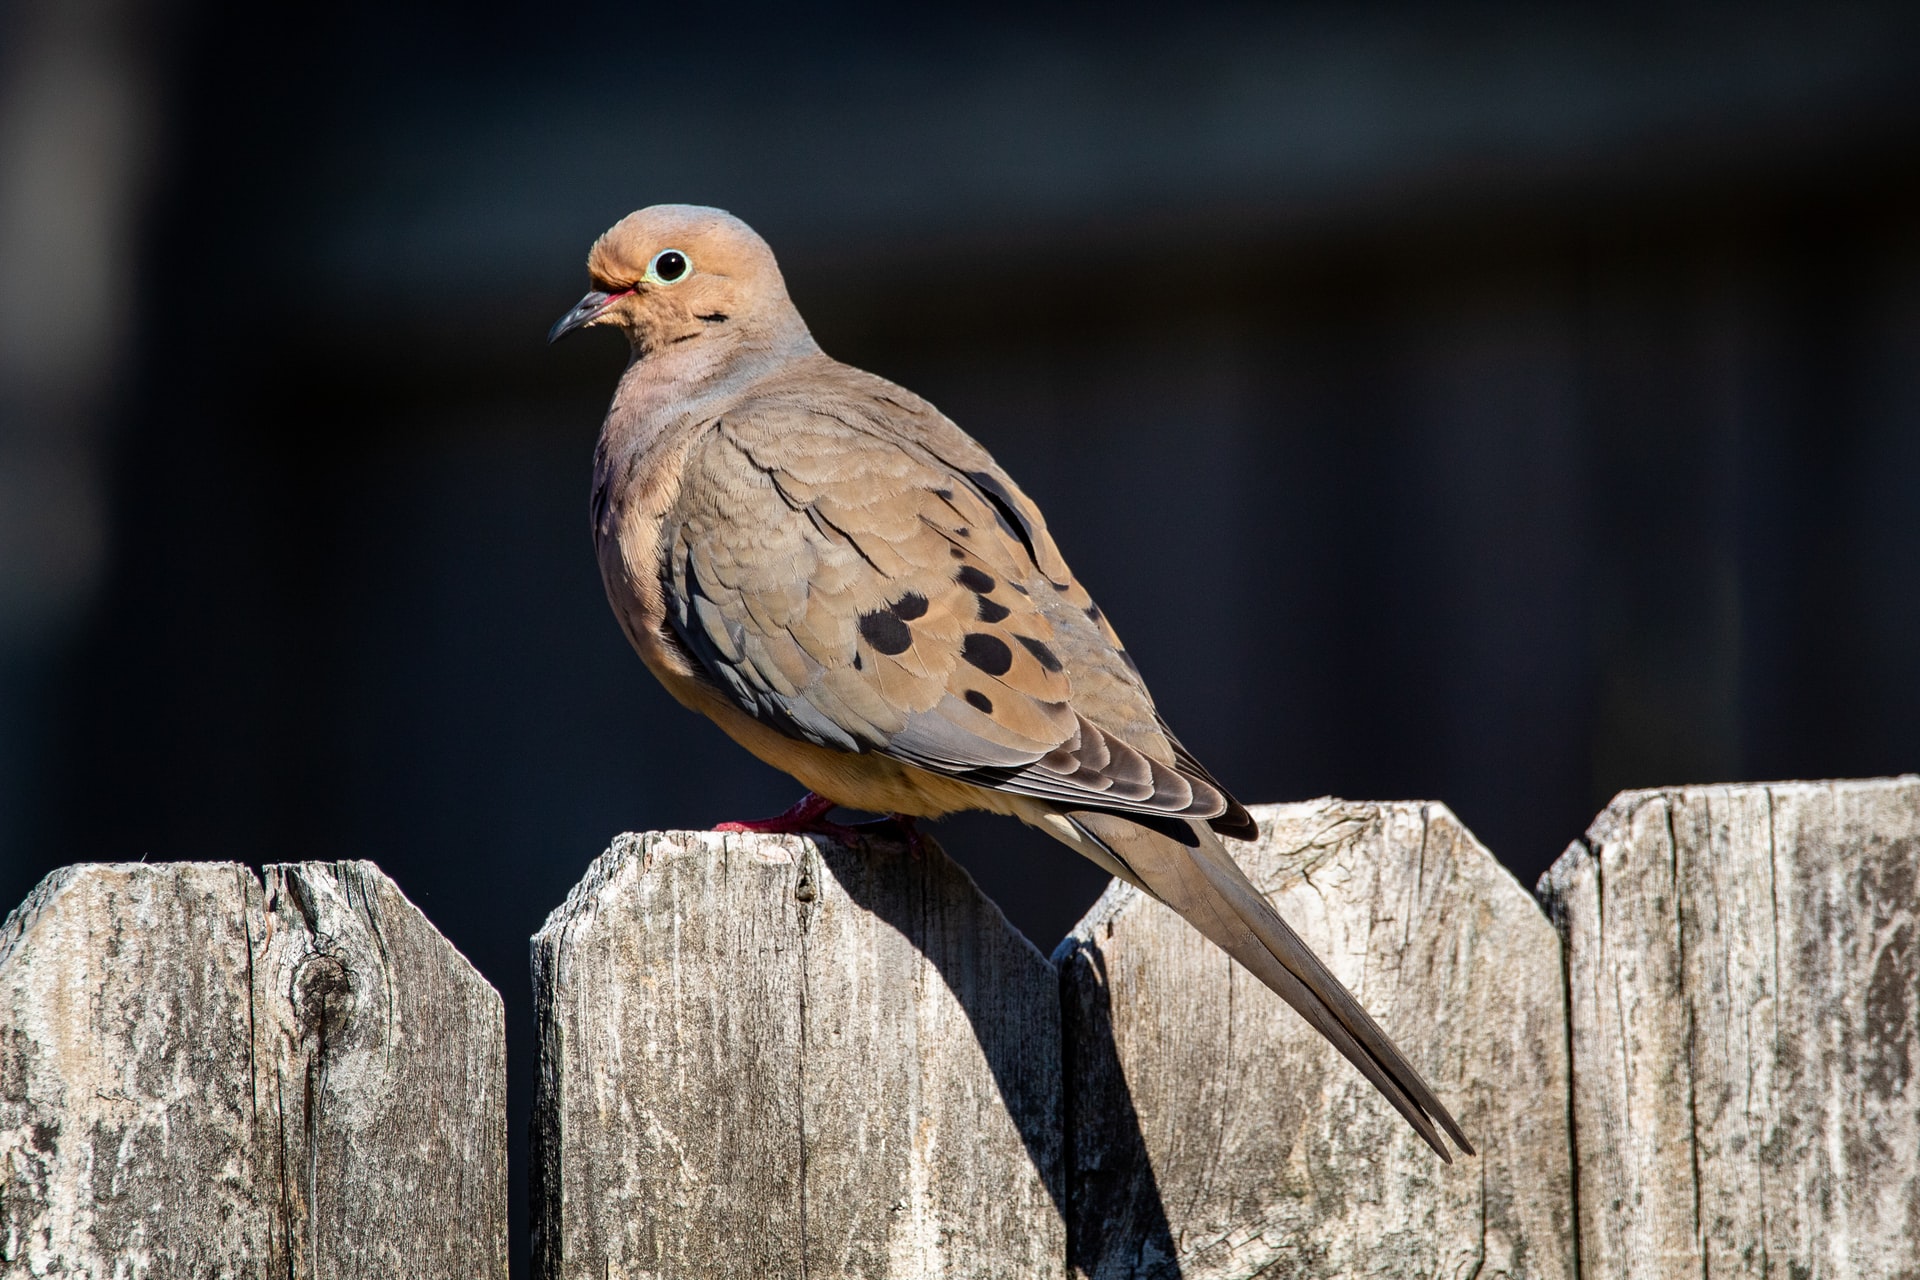 Mourning dove meaning and its symbolism